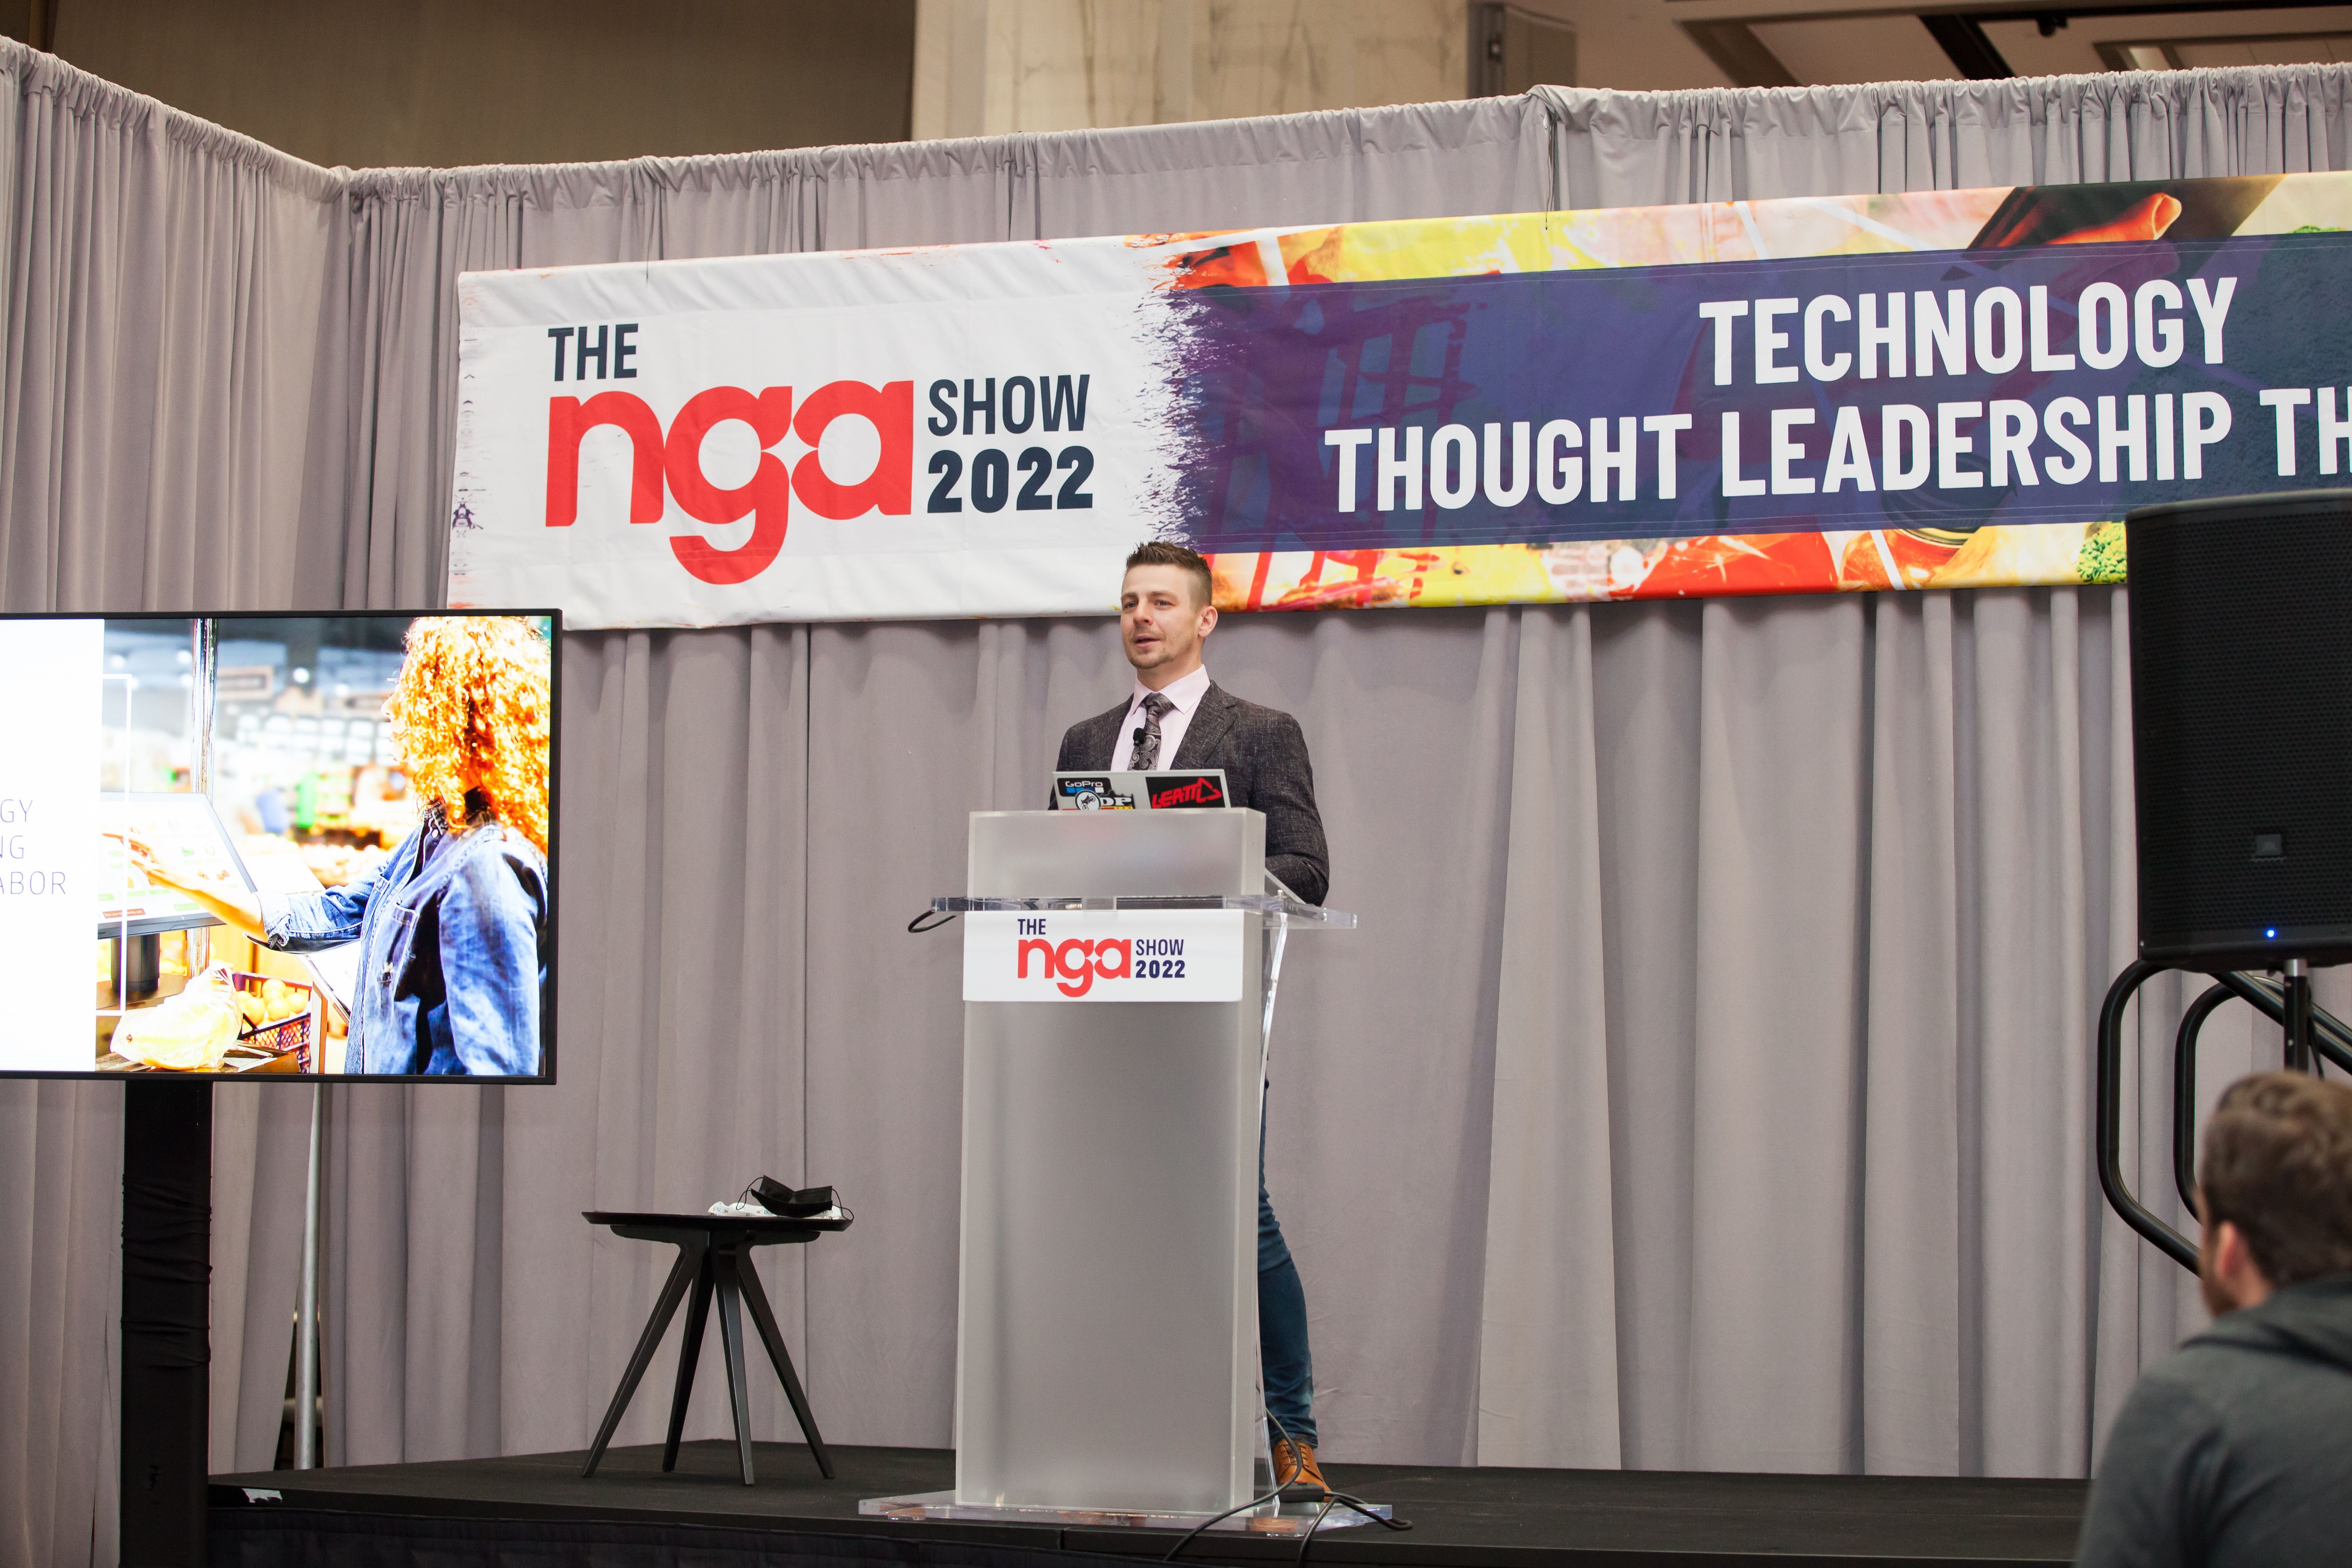 Technology Thought Leadership Theater